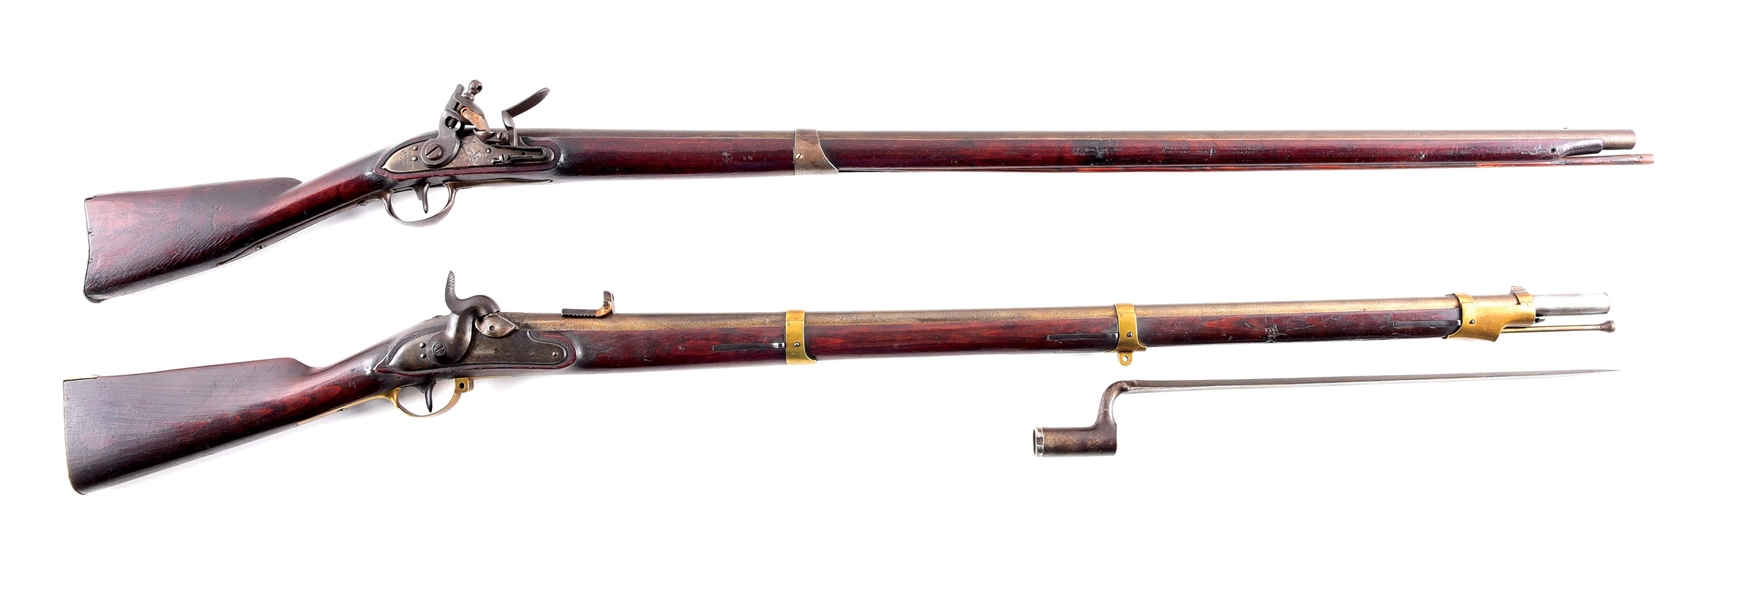 (A) LOT OF 2: HARPERS FERRY 1816 FLINTLOCK AND POTSDAM 1831 PERCUSSION MUSKETS.